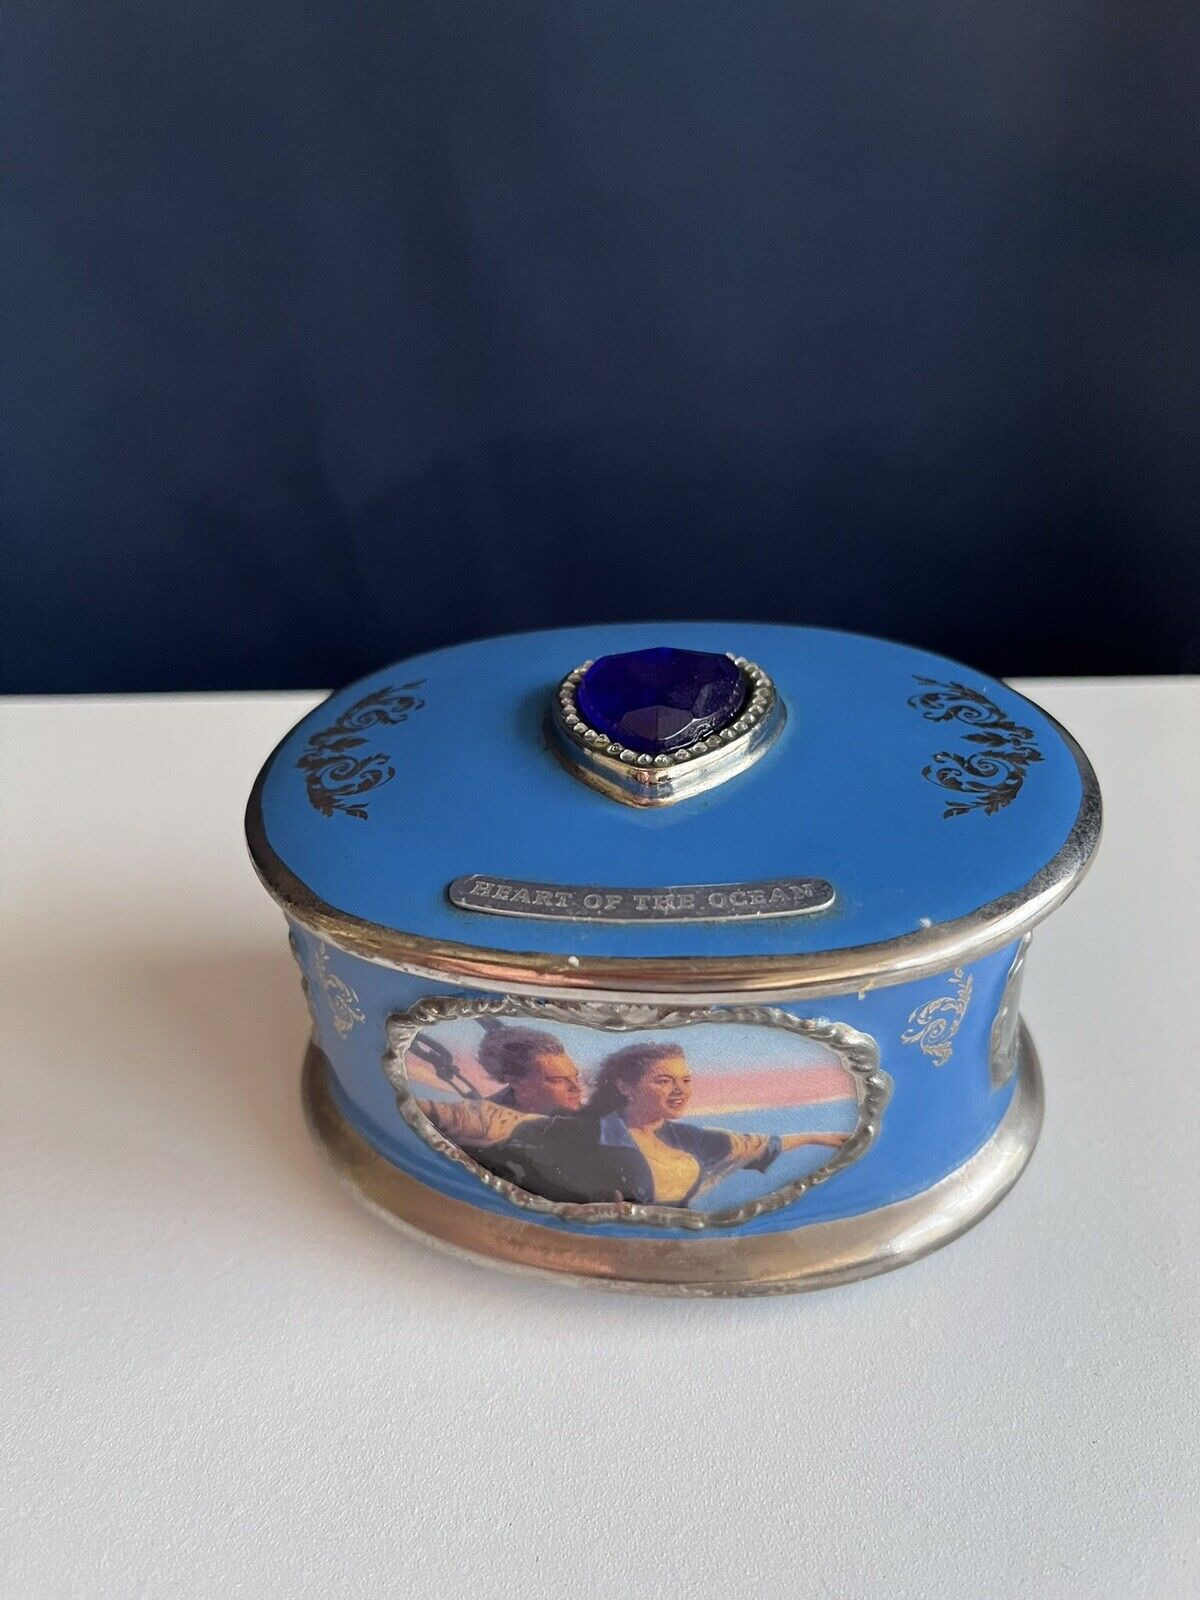 Titanic Heirloom Porcelain Music Box Collection